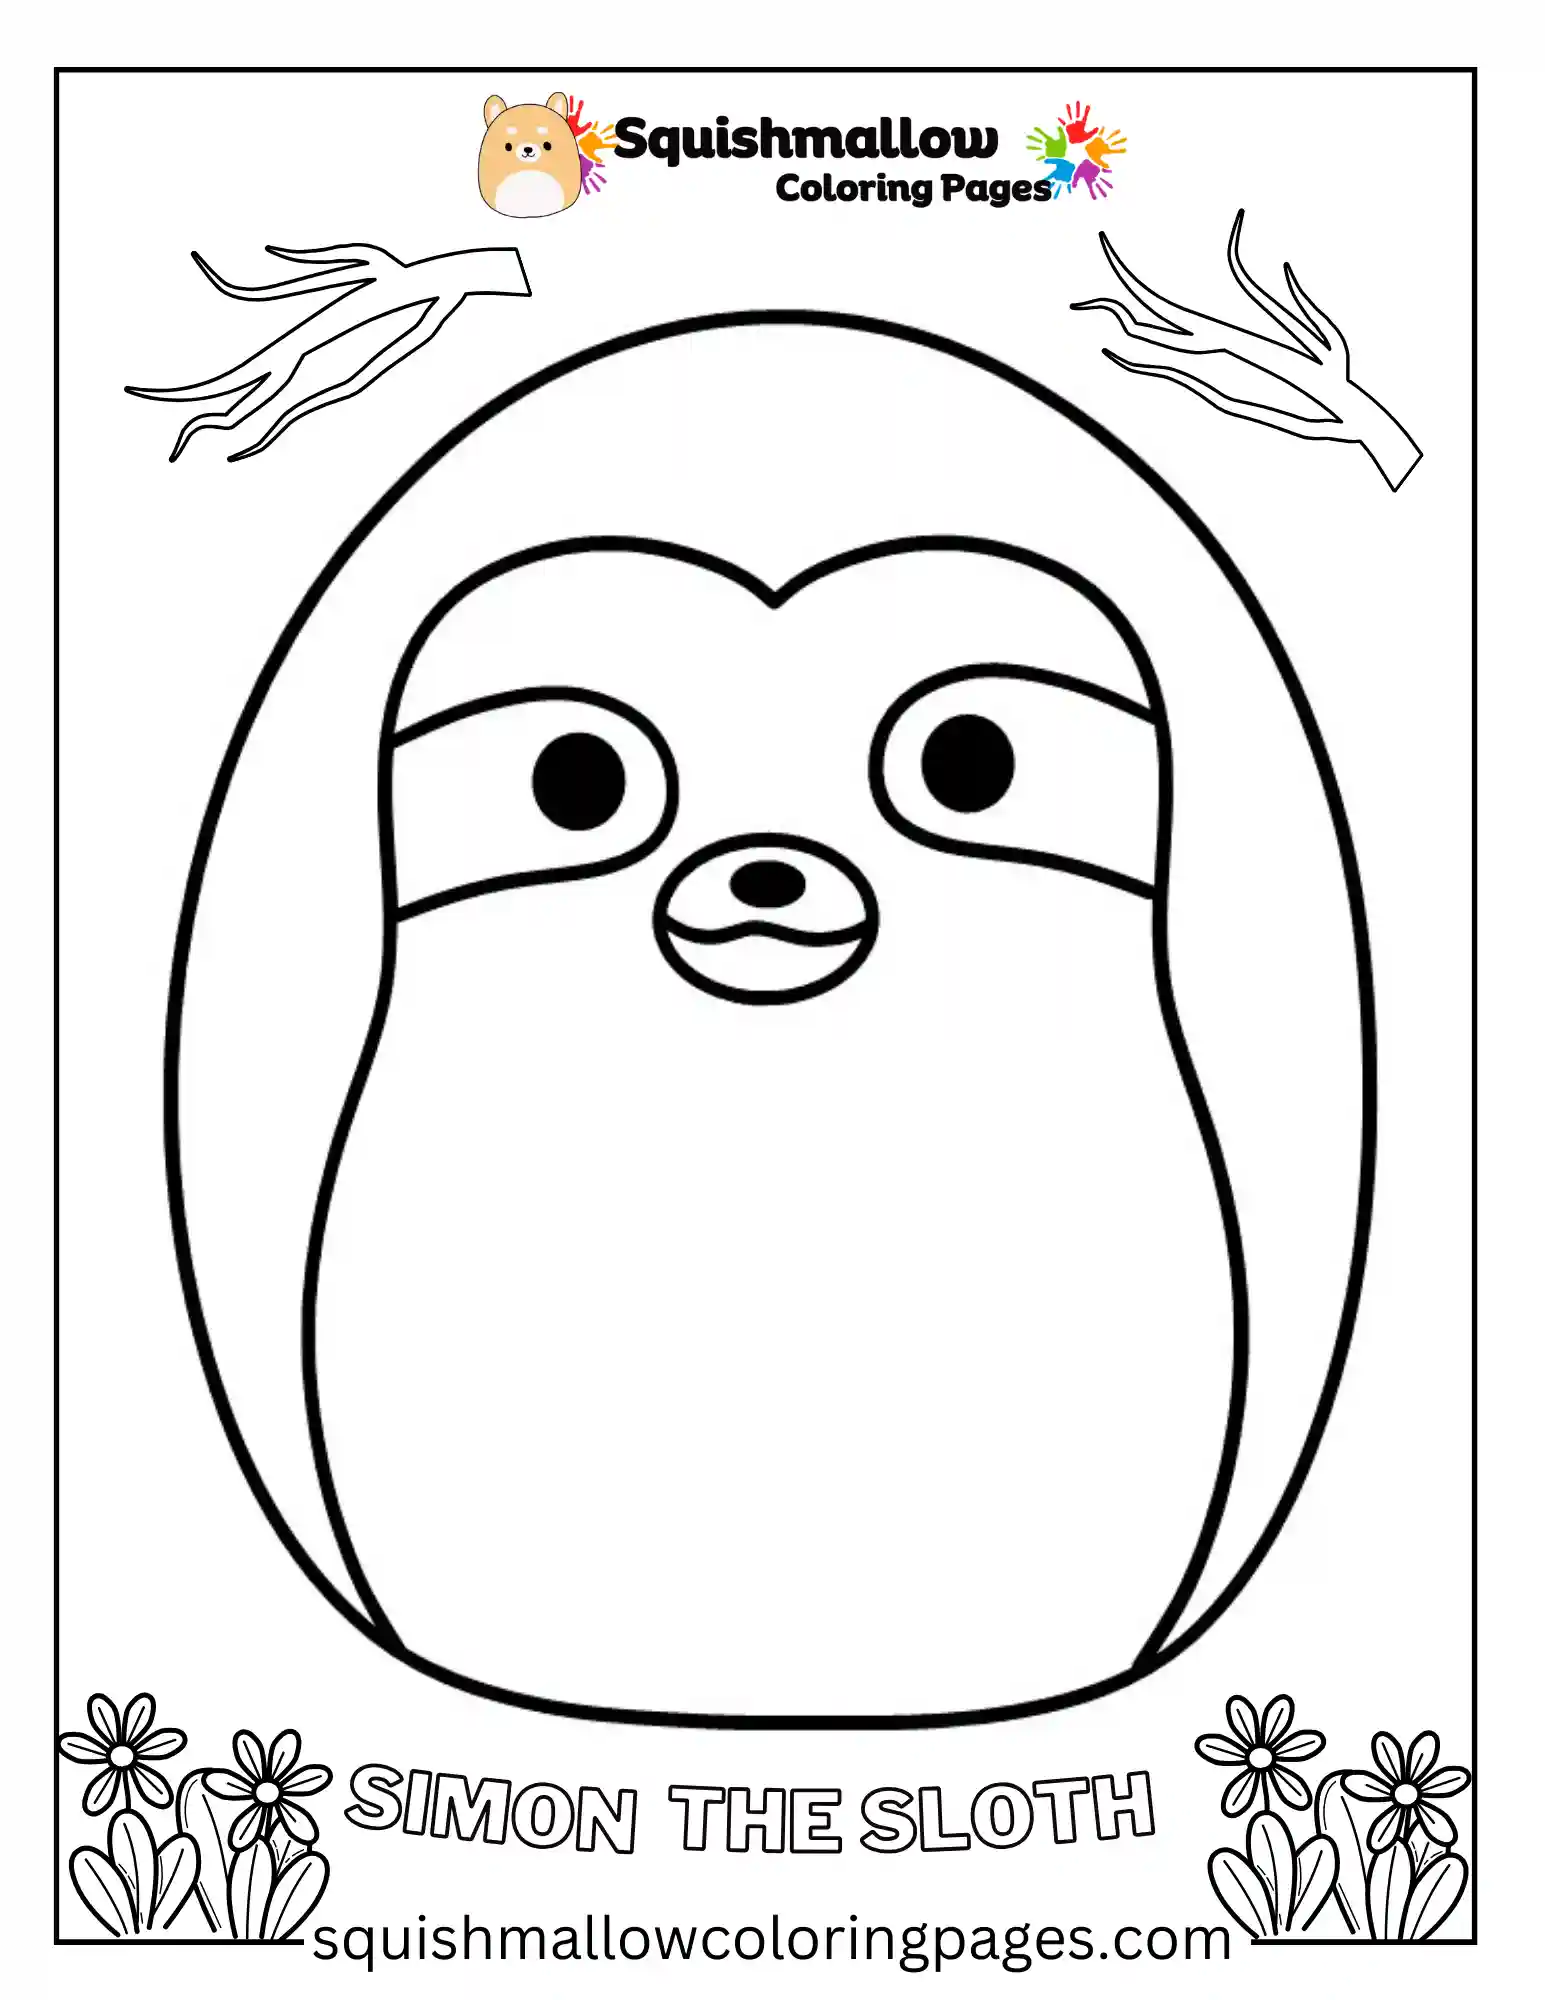 Simon The Sloth Squishmallow Coloring Pages